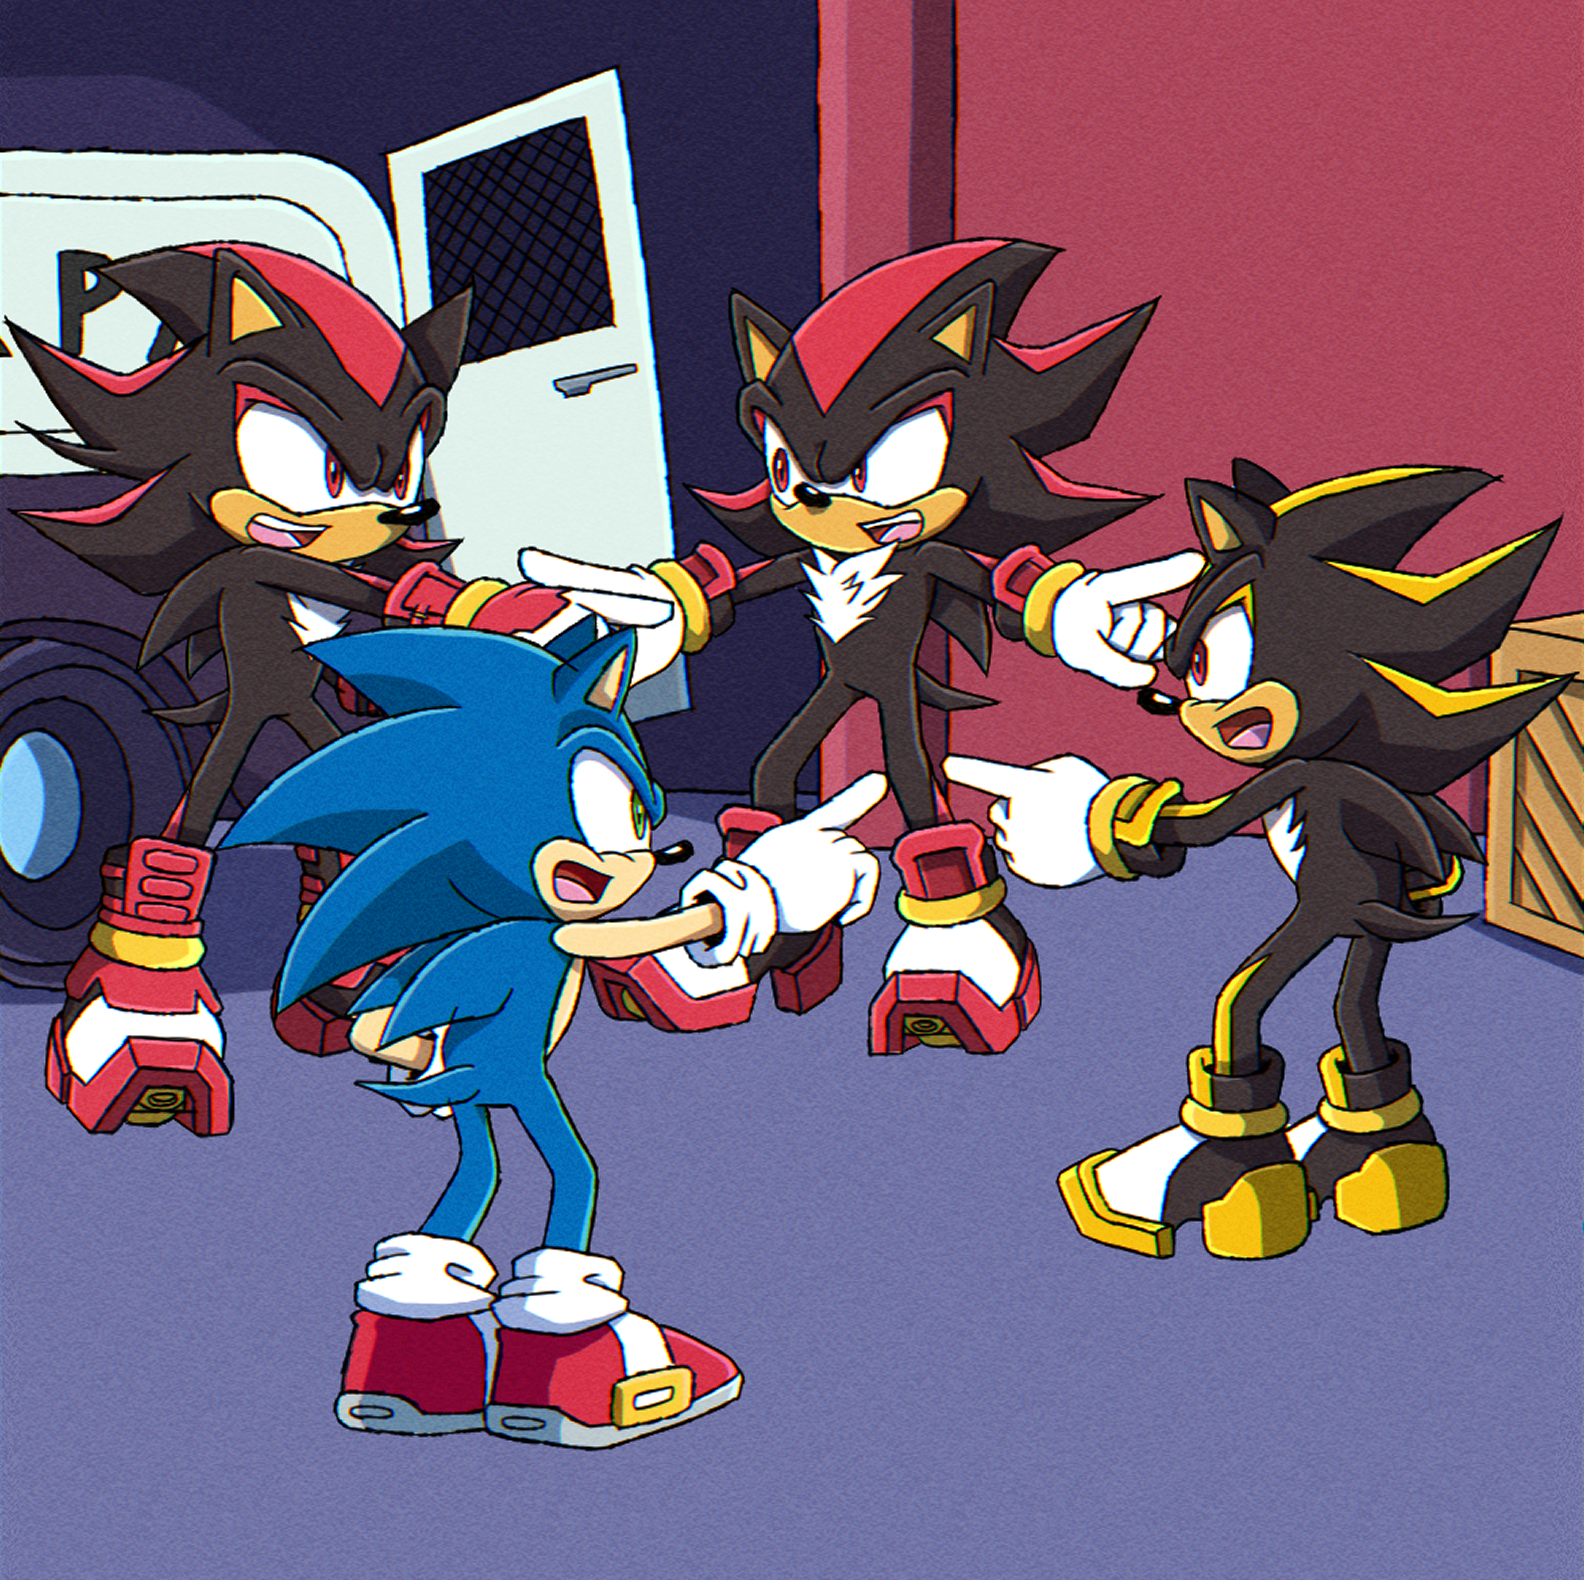 Dark Mode, Sonic Pointing at Sonic